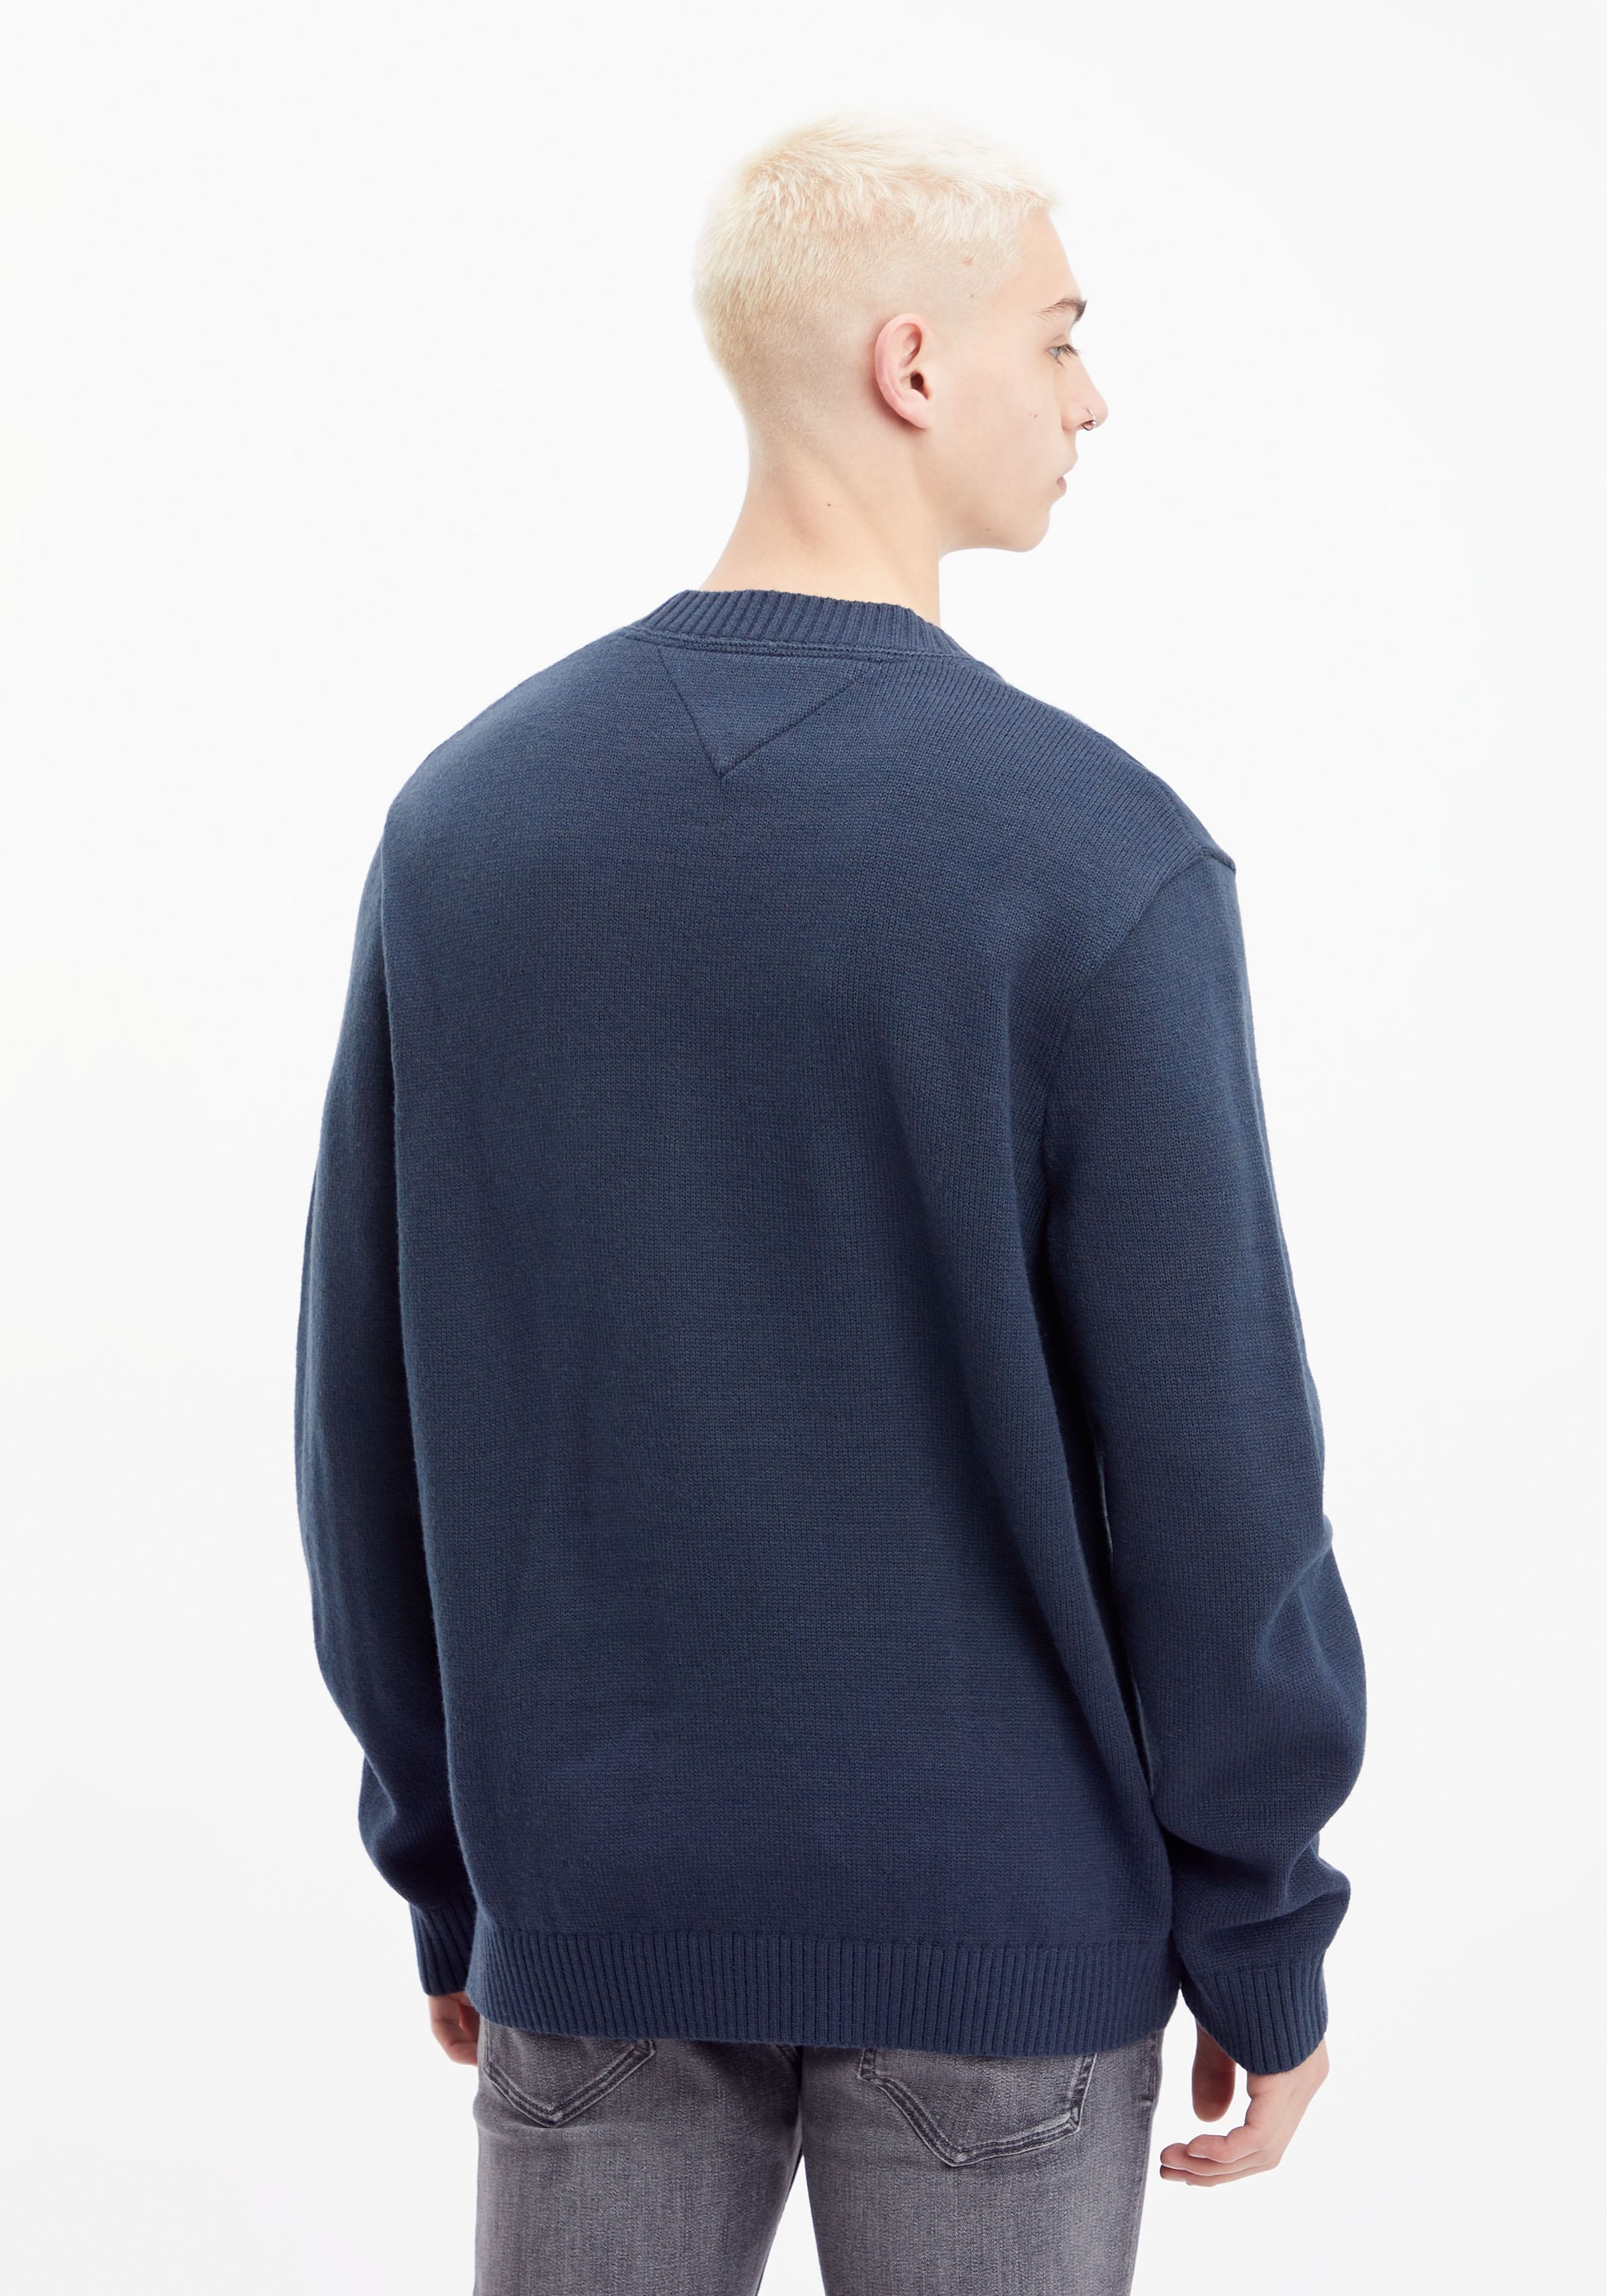 Strickpullover SIGNATURE bei »TJM SWEATER« Tommy ♕ Jeans RLXD